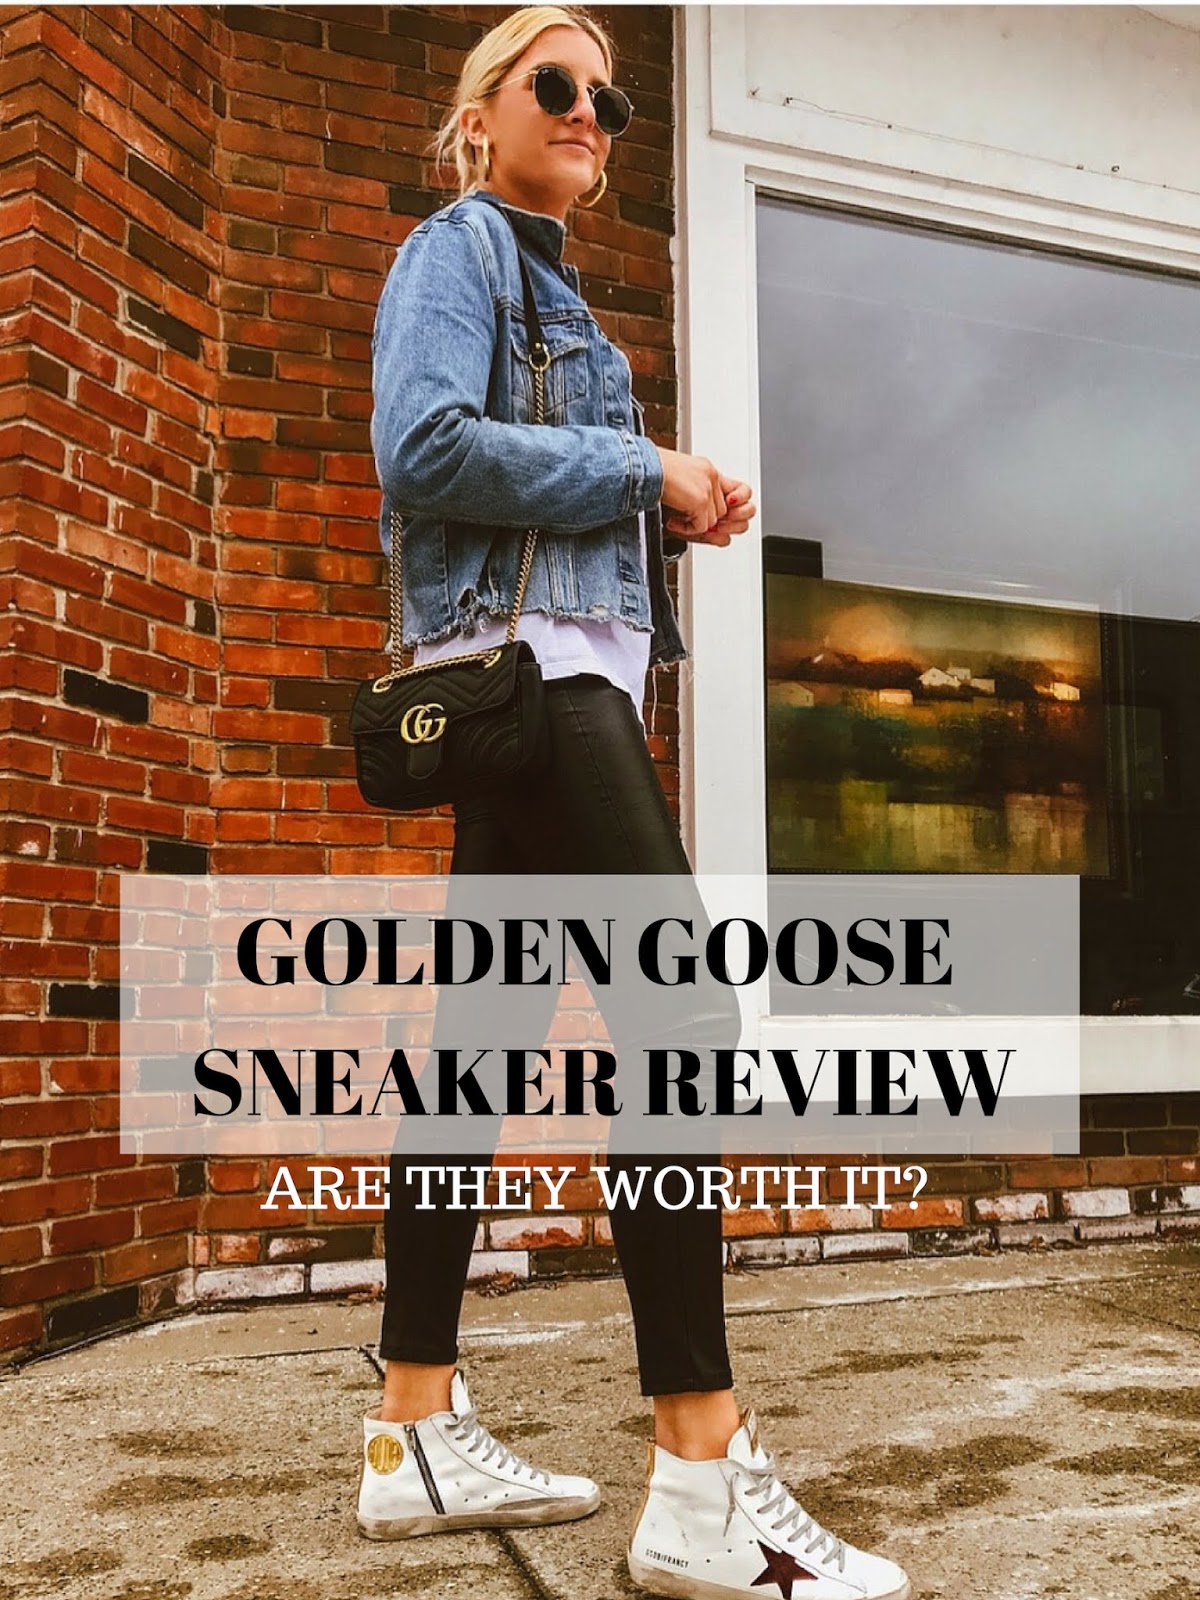 GOLDEN GOOSE SNEAKER REVIEW. ARE THEY WORTH IT?